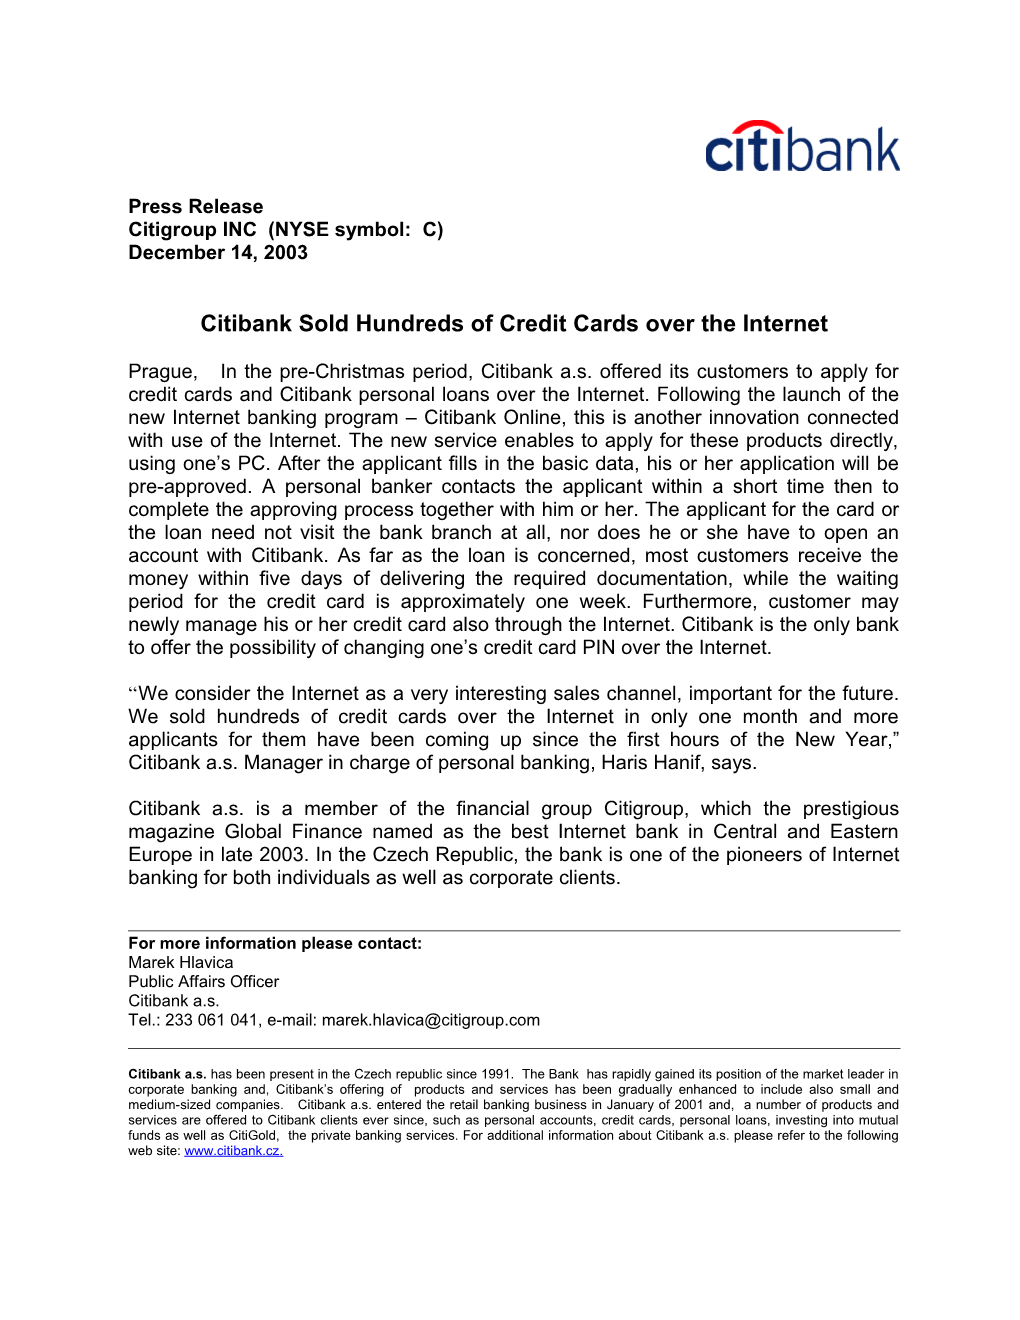 Citibank Sold Hundreds of Credit Cards Over the Internet